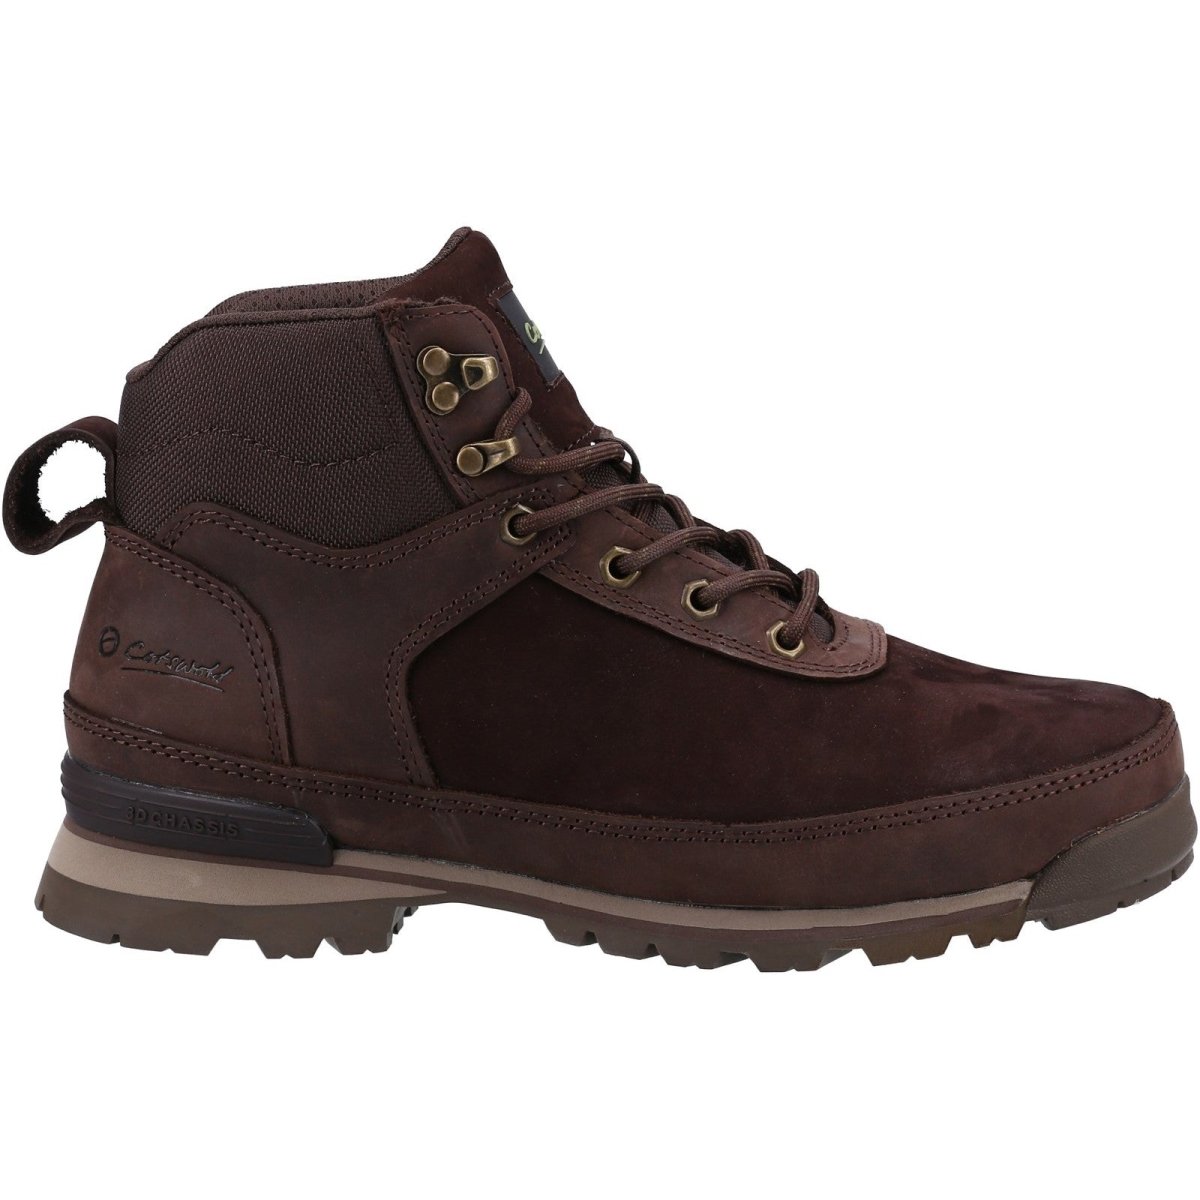 Cotswold Yanworth Waterproof Mens Countryside Hiking Boots - Shoe Store Direct